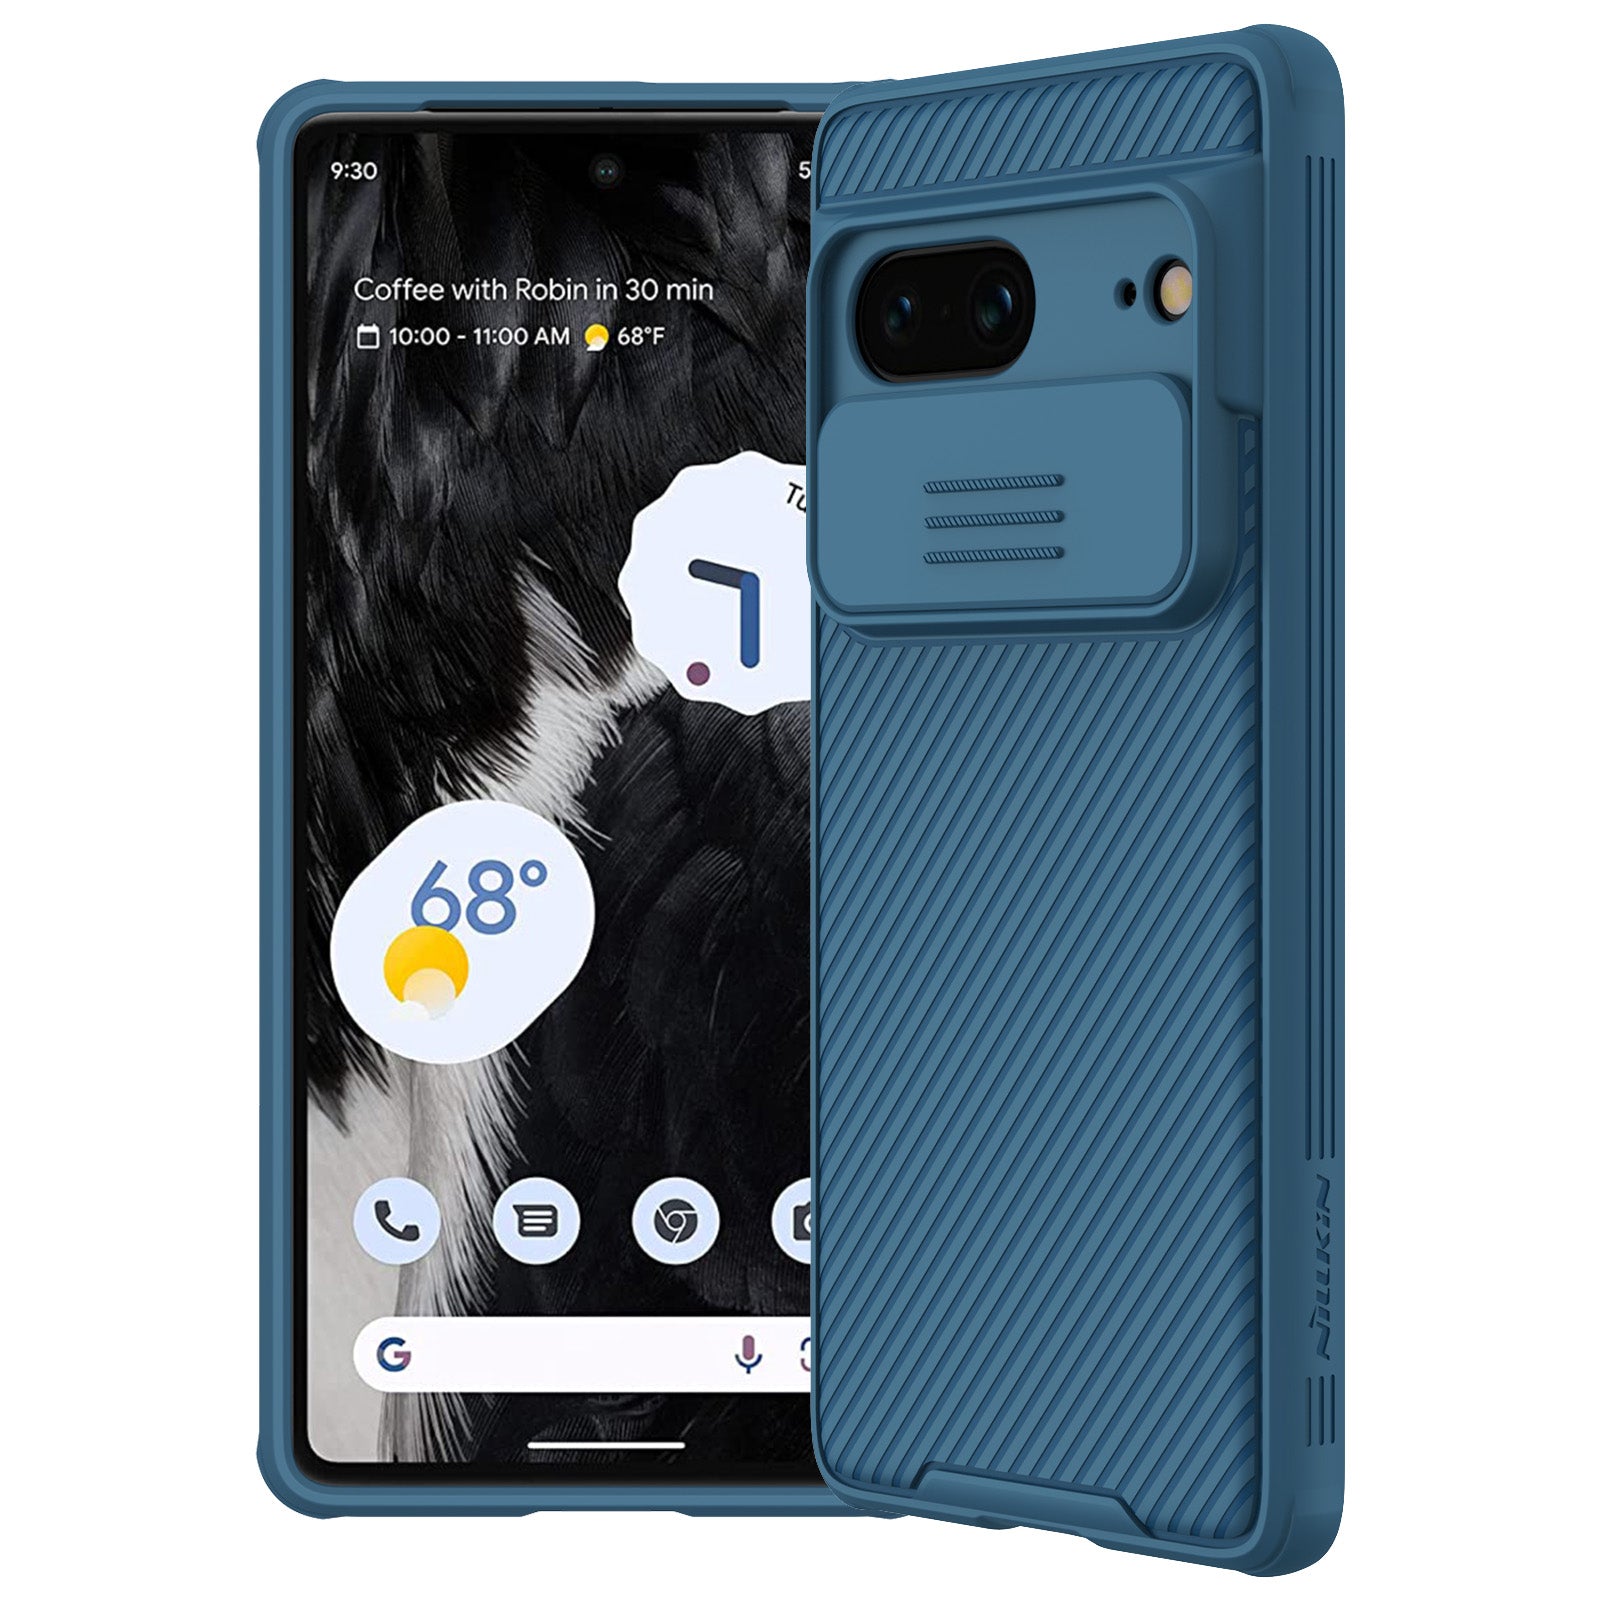 Google Pixel 7 Cases, Covers &amp; Accessories